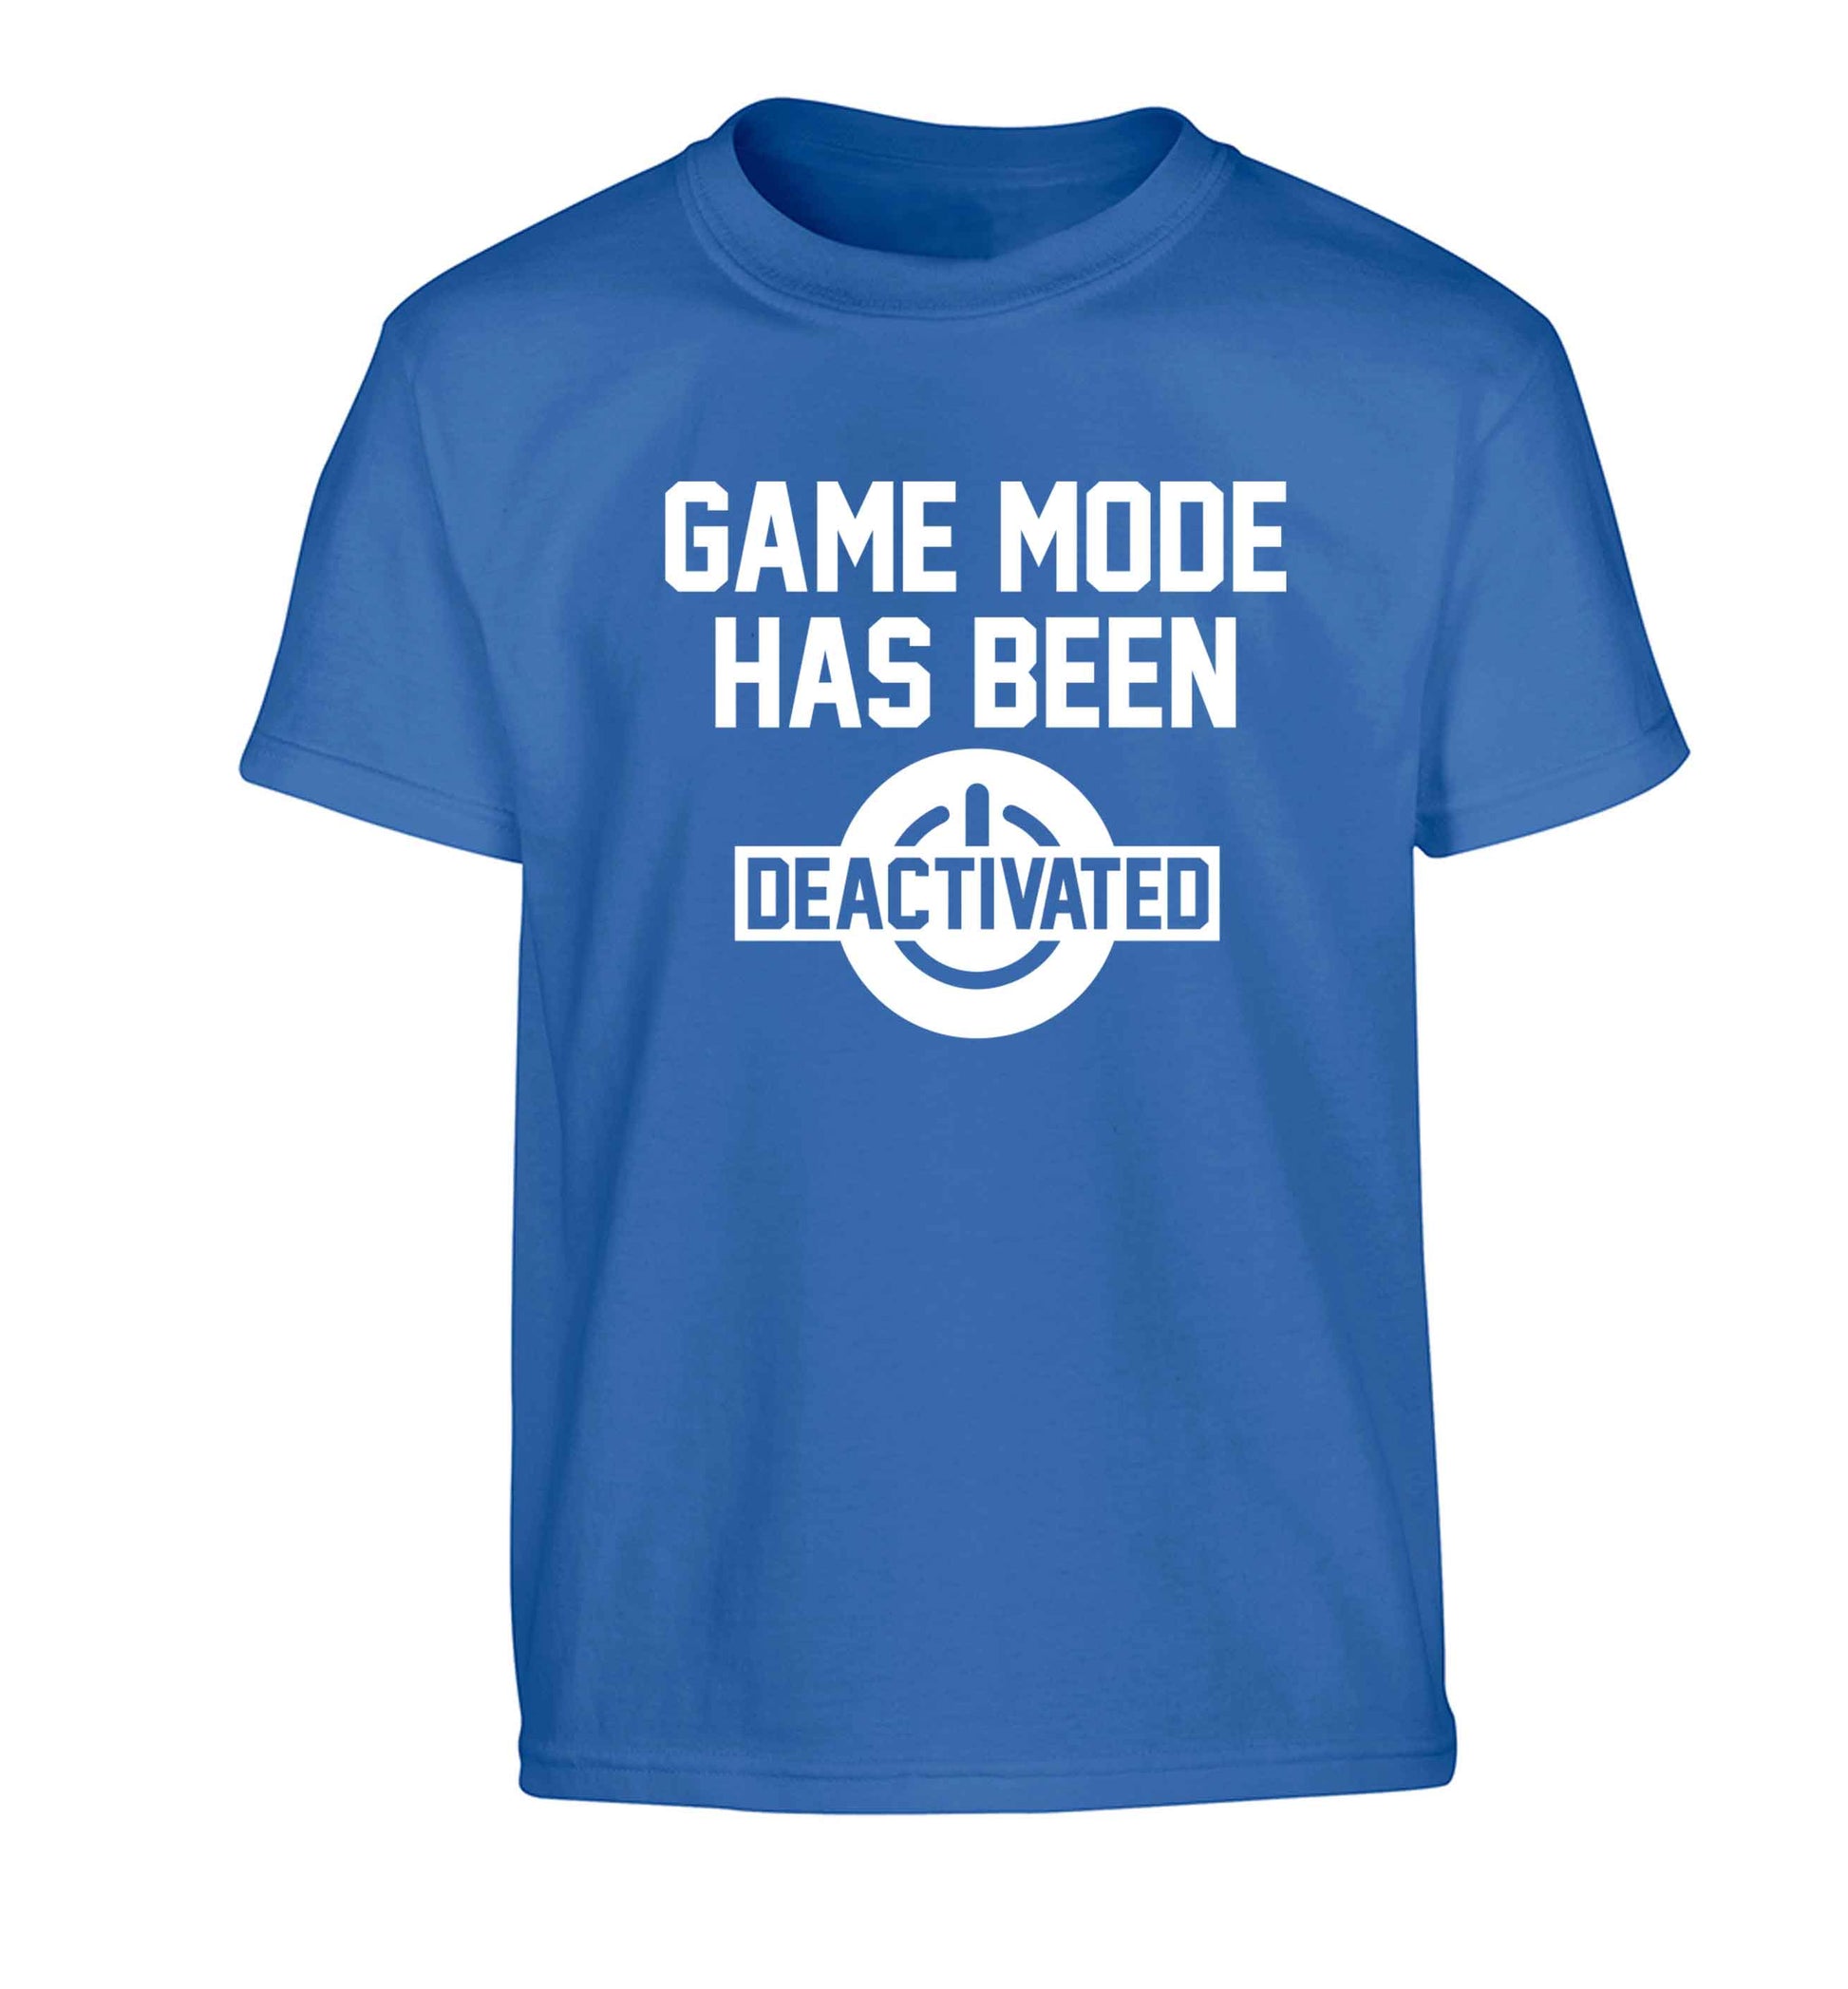 Game Mode Has Been Deactivated Children's blue Tshirt 12-13 Years